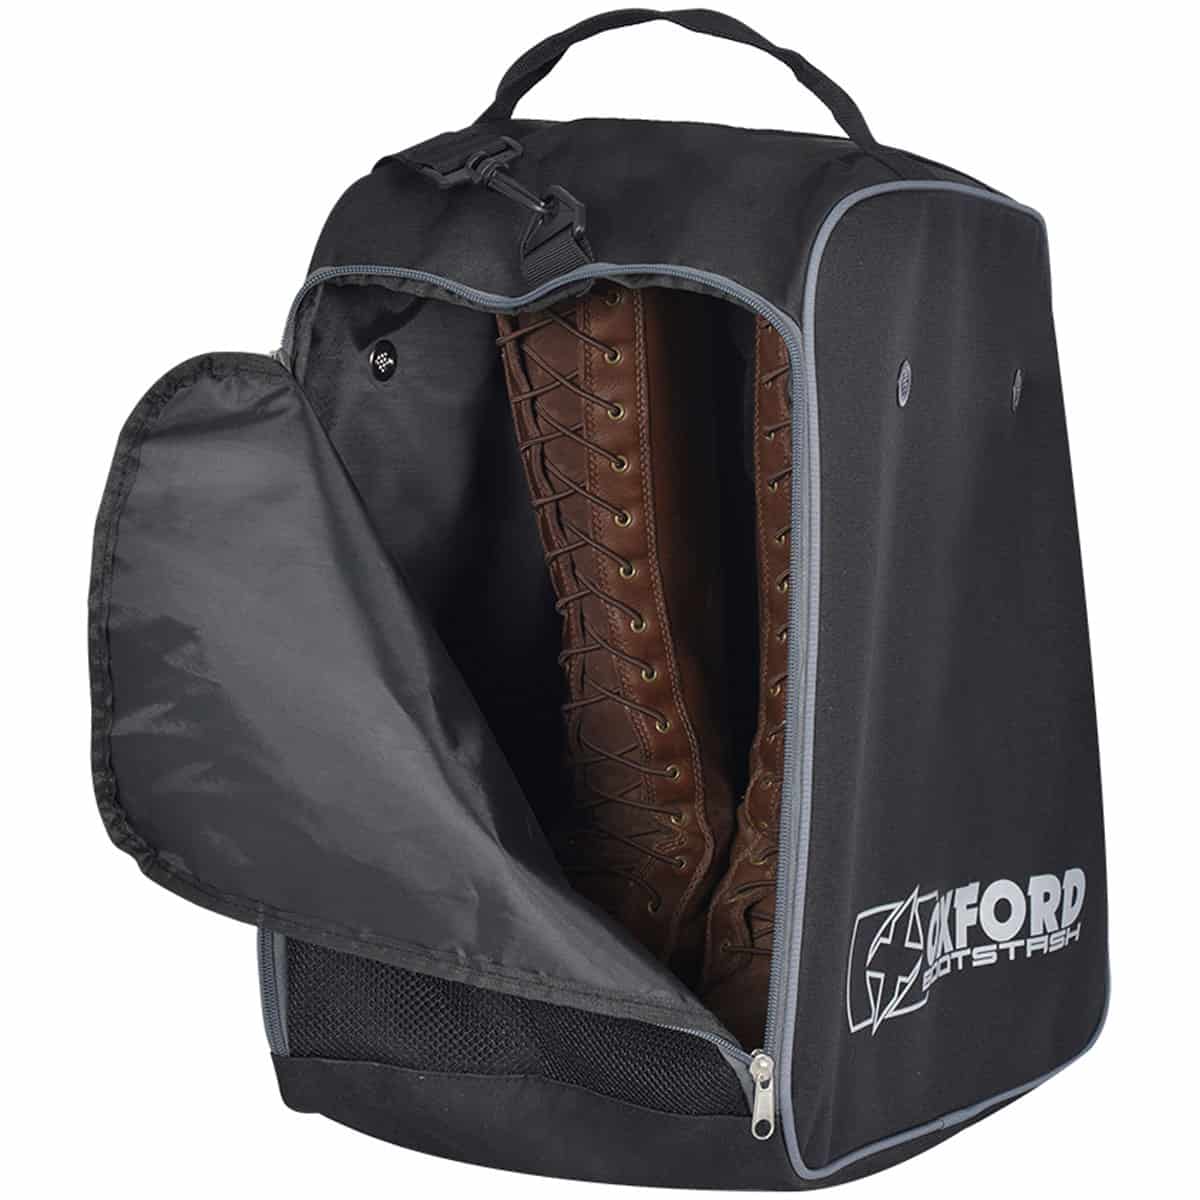 Whatever your boot-storing needs, put them in the Oxford Bootstash Deluxe Padded Boot Bag